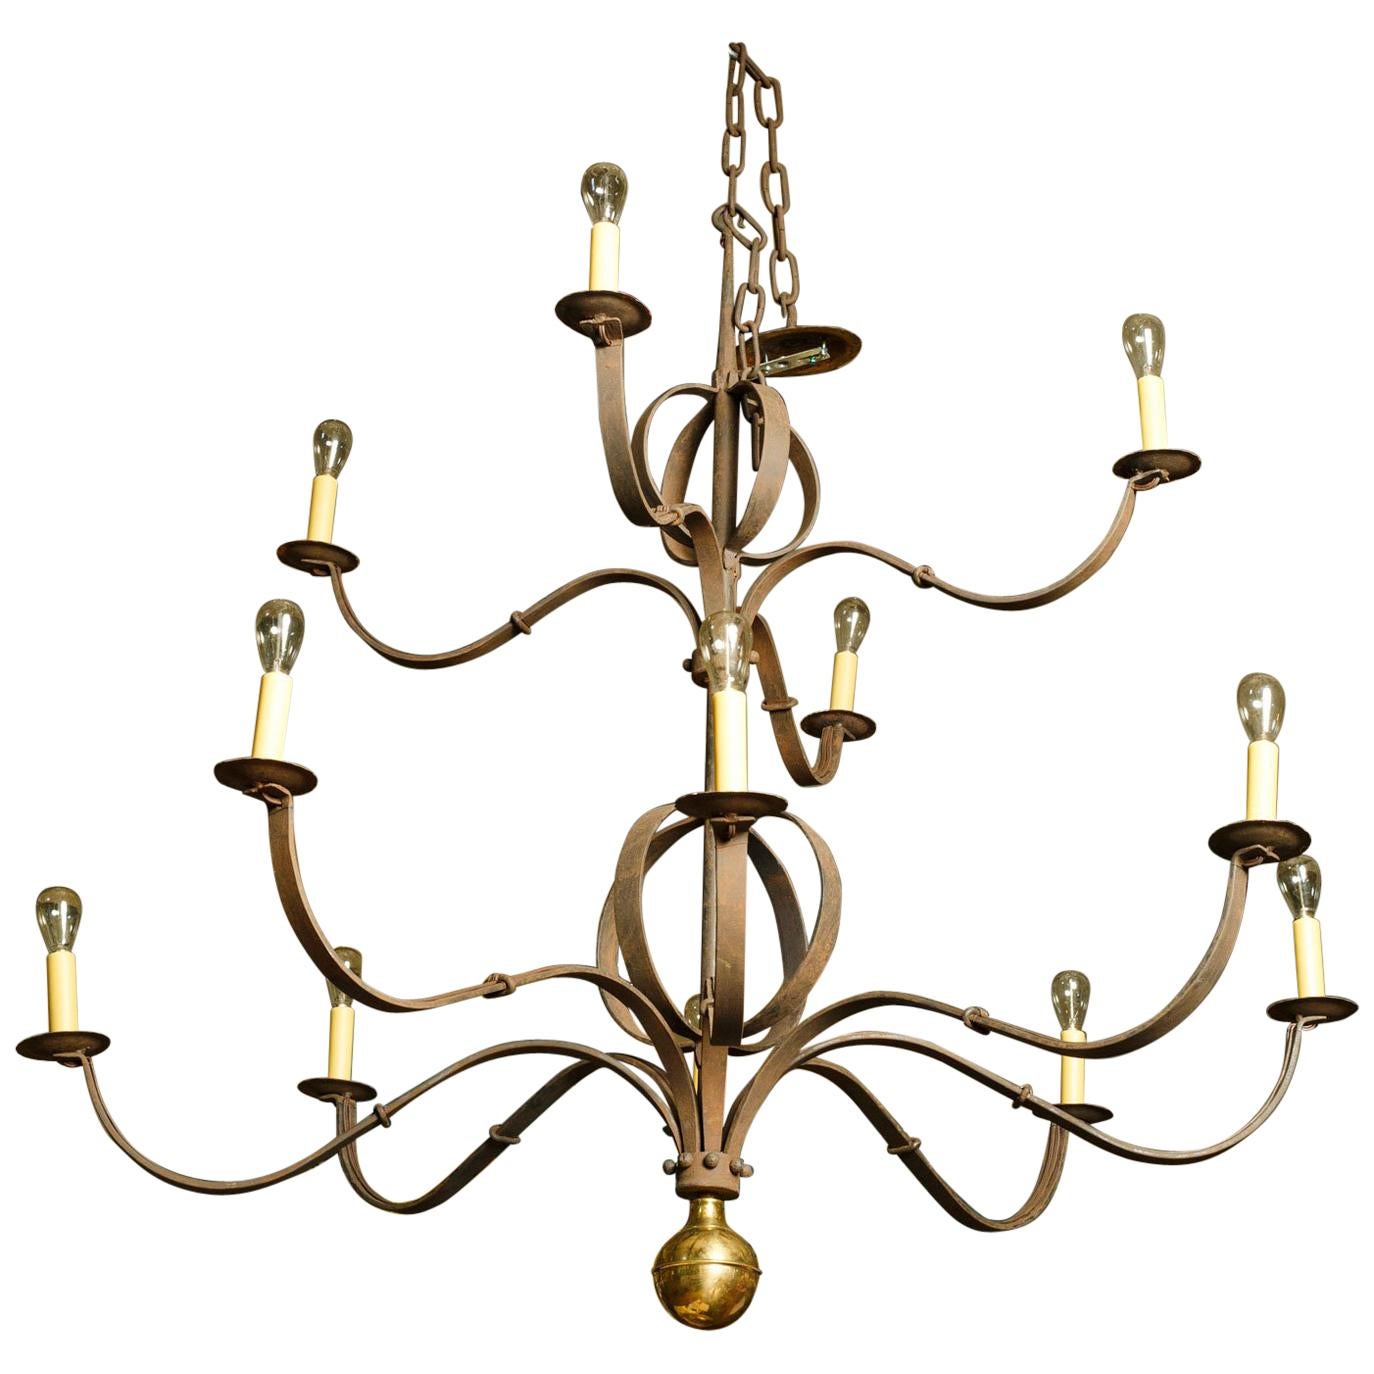 Monumental Two-Tier Forged Iron "Tuscarawas" Chandelier